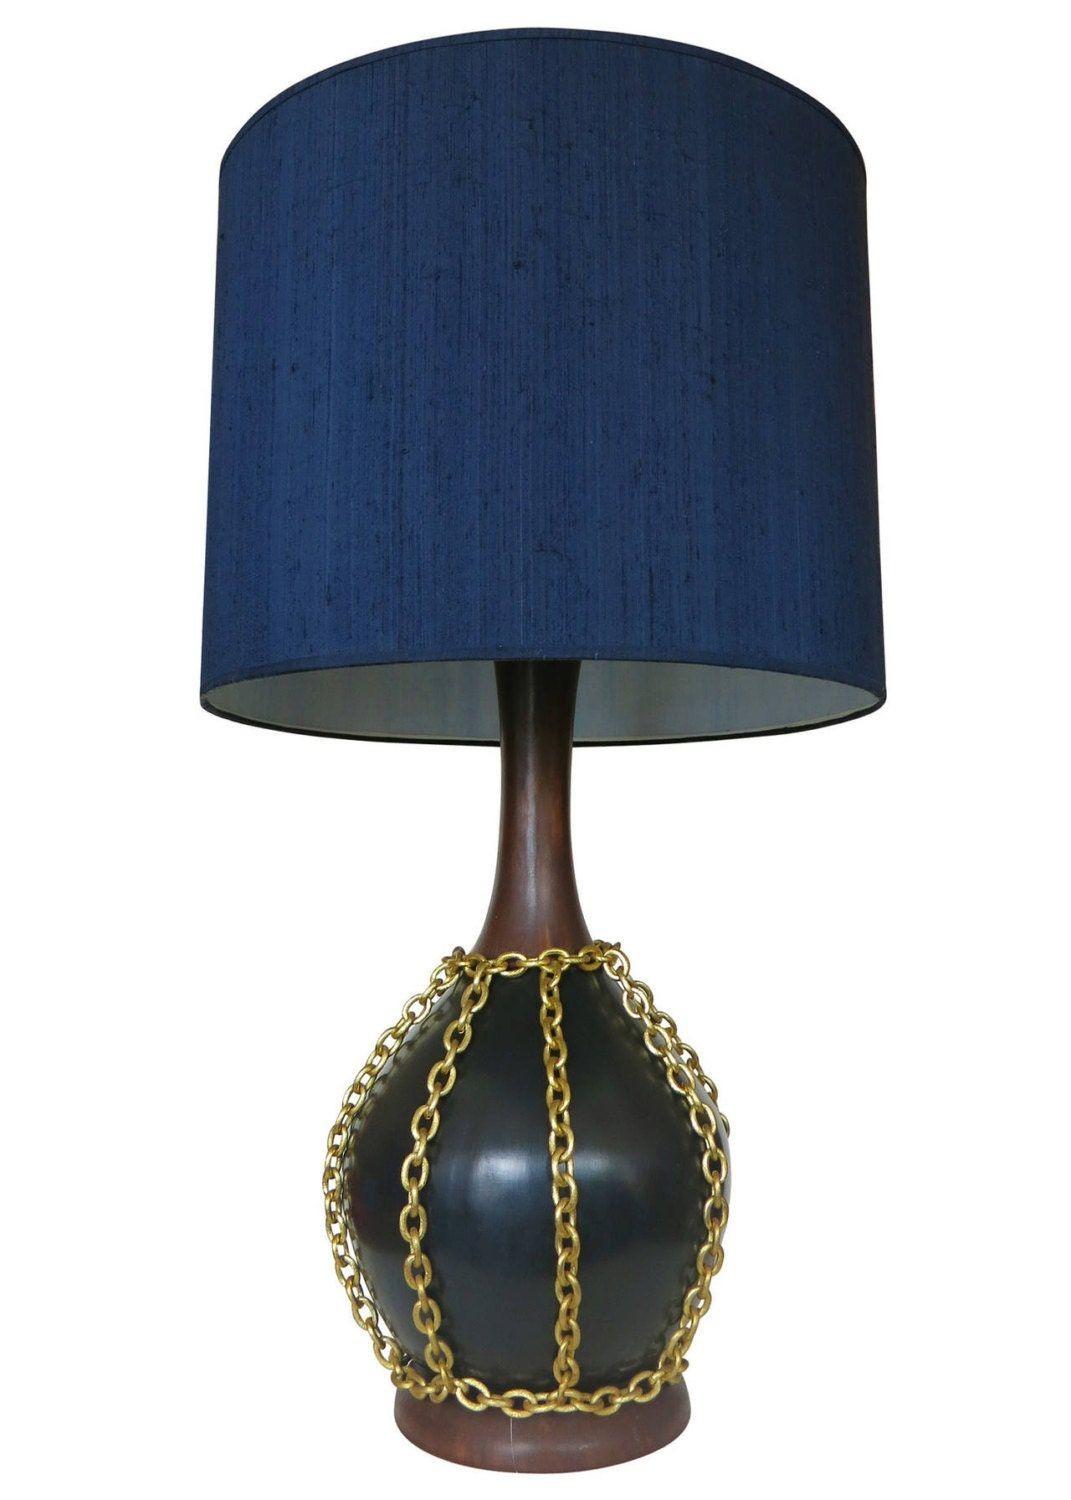 Made circa 1960, this large pair of pottery lamps features a black and wood grain finish with a unique decorative gold tone metal chain that hangs around the center of each lamp body. Also included with the lamp are matching oversized black cloth